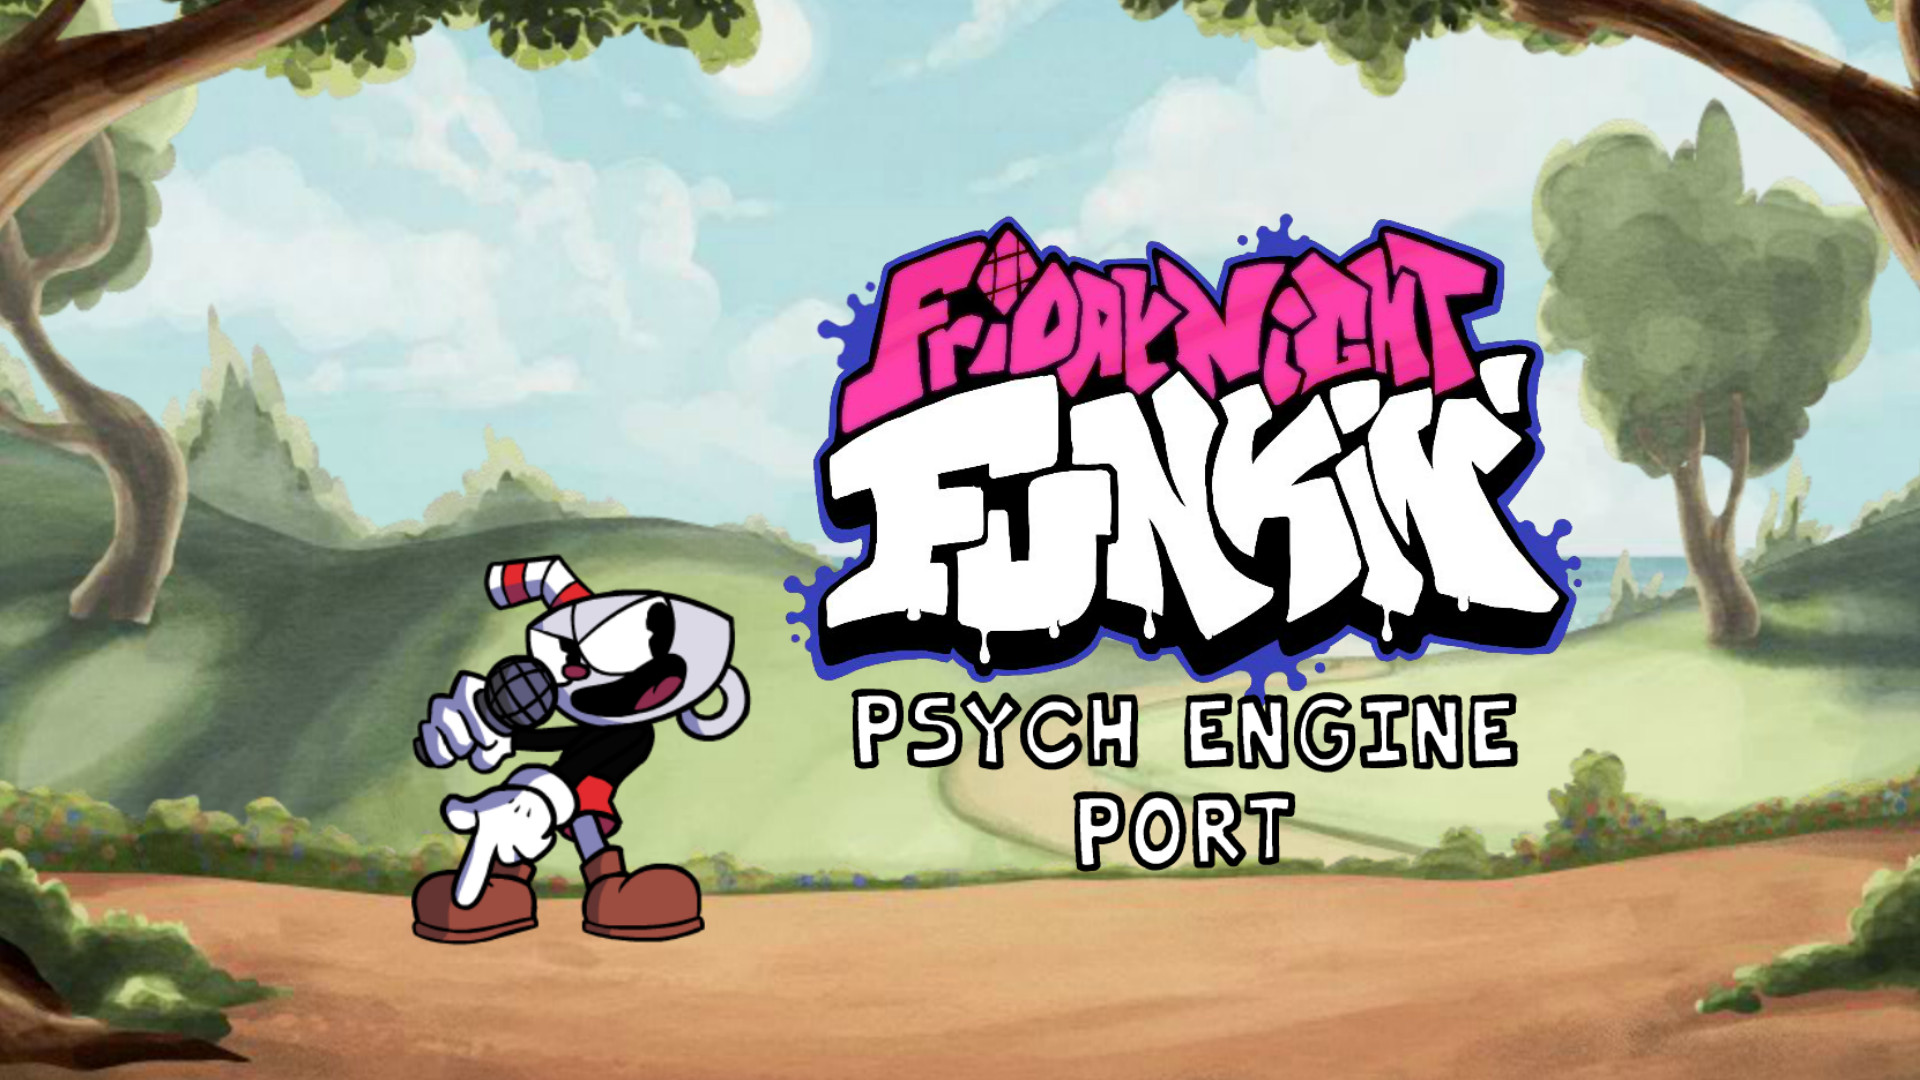 FNF indie Cross Cuphead Psych engine Port. Human: Fall Flat Cuphead a way out serious Sam:. Psych engine phantomuff difficult font. Инди кросс играть